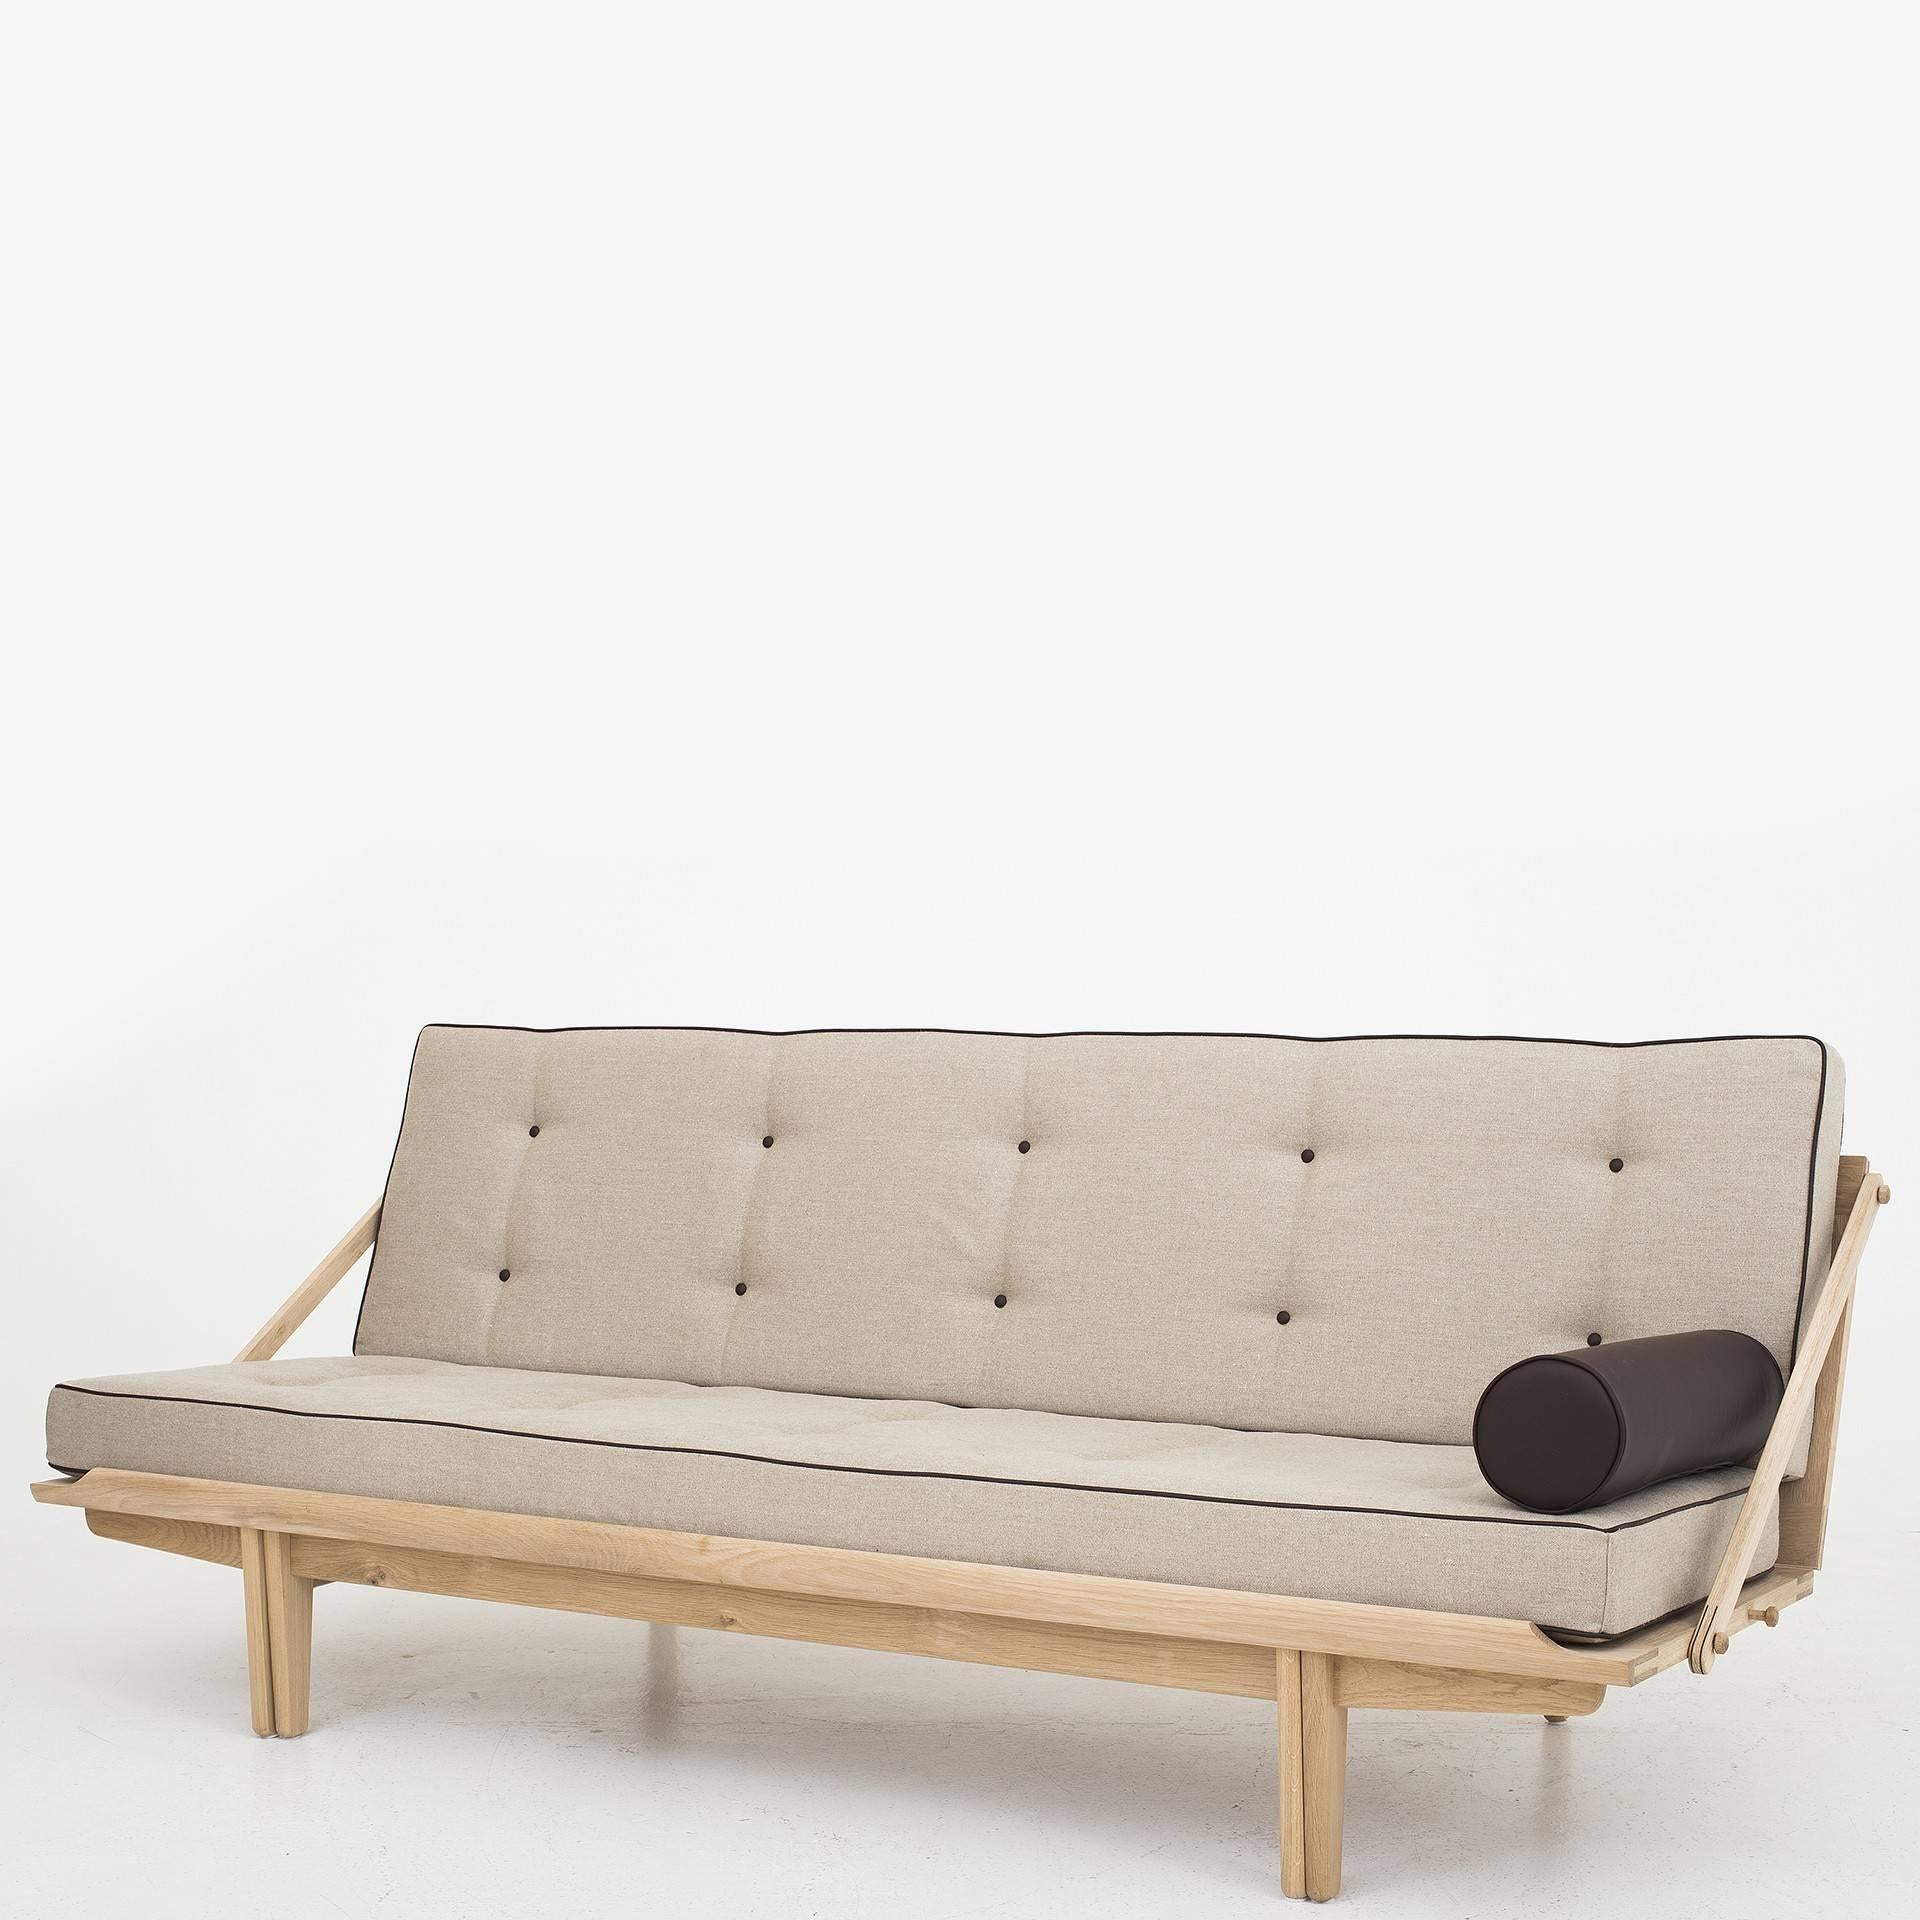 Poul Volther's daybed from 1959 is the first piece of furniture that has been put into production by Klassik in collaboration with Poul Volther's own family. The daybed is made in Denmark and is available with frame of walnut or oak. The mattress is